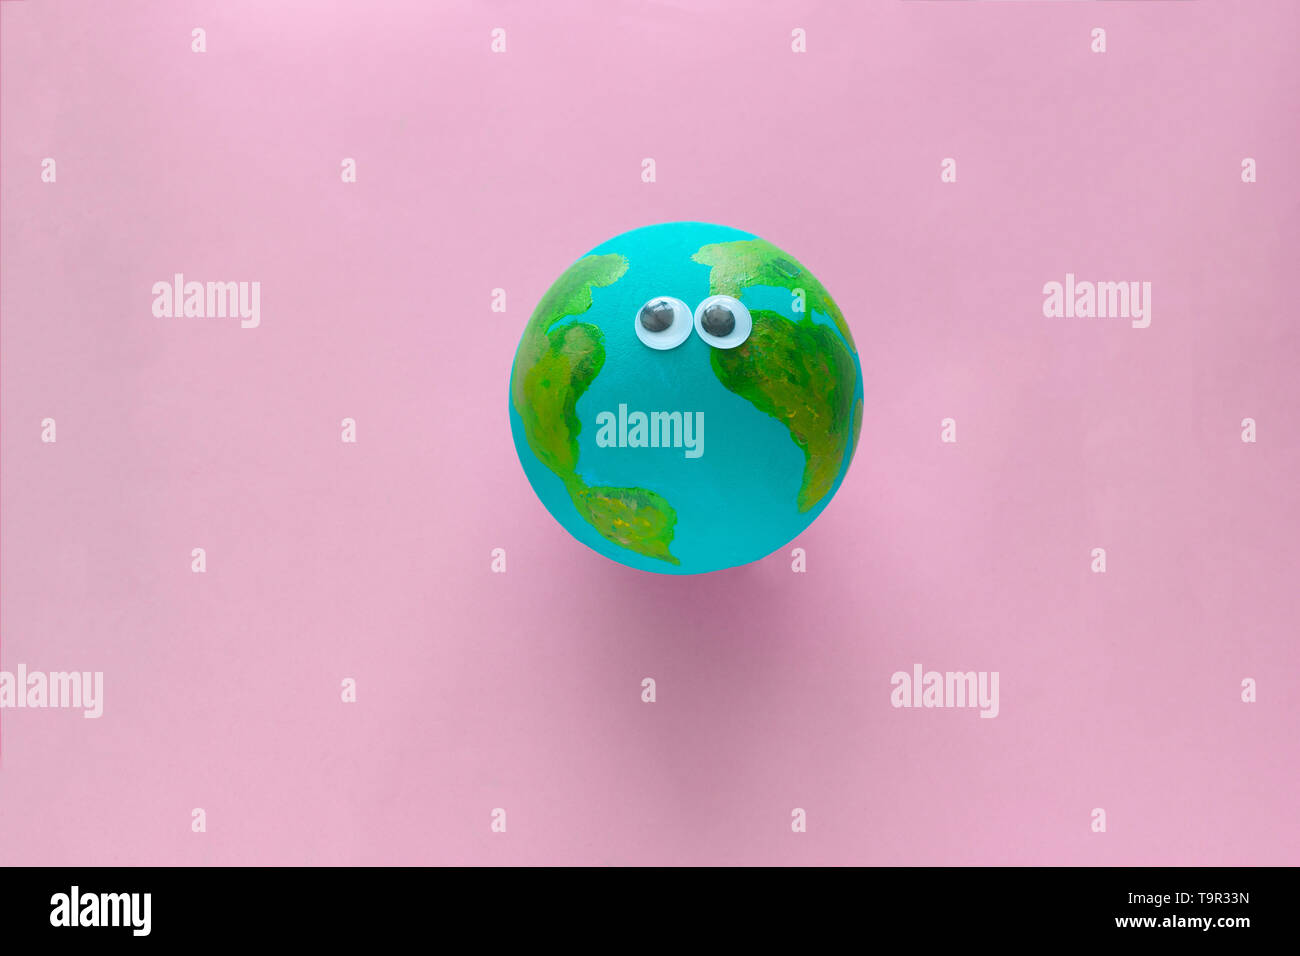 Earth planet model with googly eyes on a pastel pink background Stock Photo